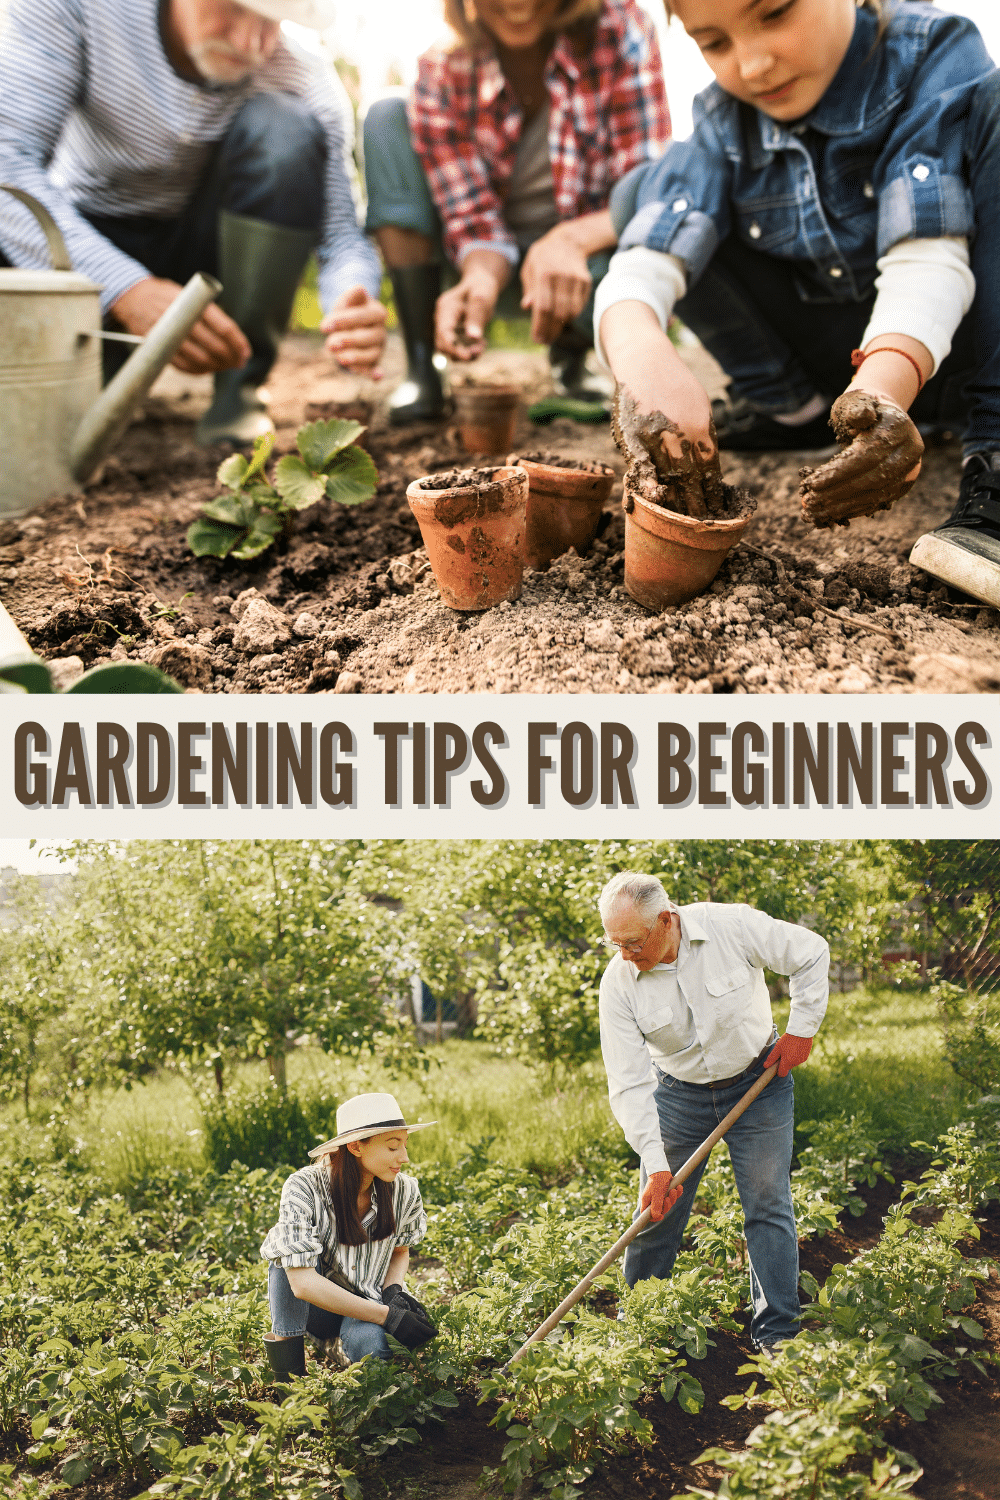 These gardening tips are perfect for beginners! If you're wanting to start your very first garden spot, you don't want to miss these tips! #garden #gardening #gardeningtips via @wondermomwannab